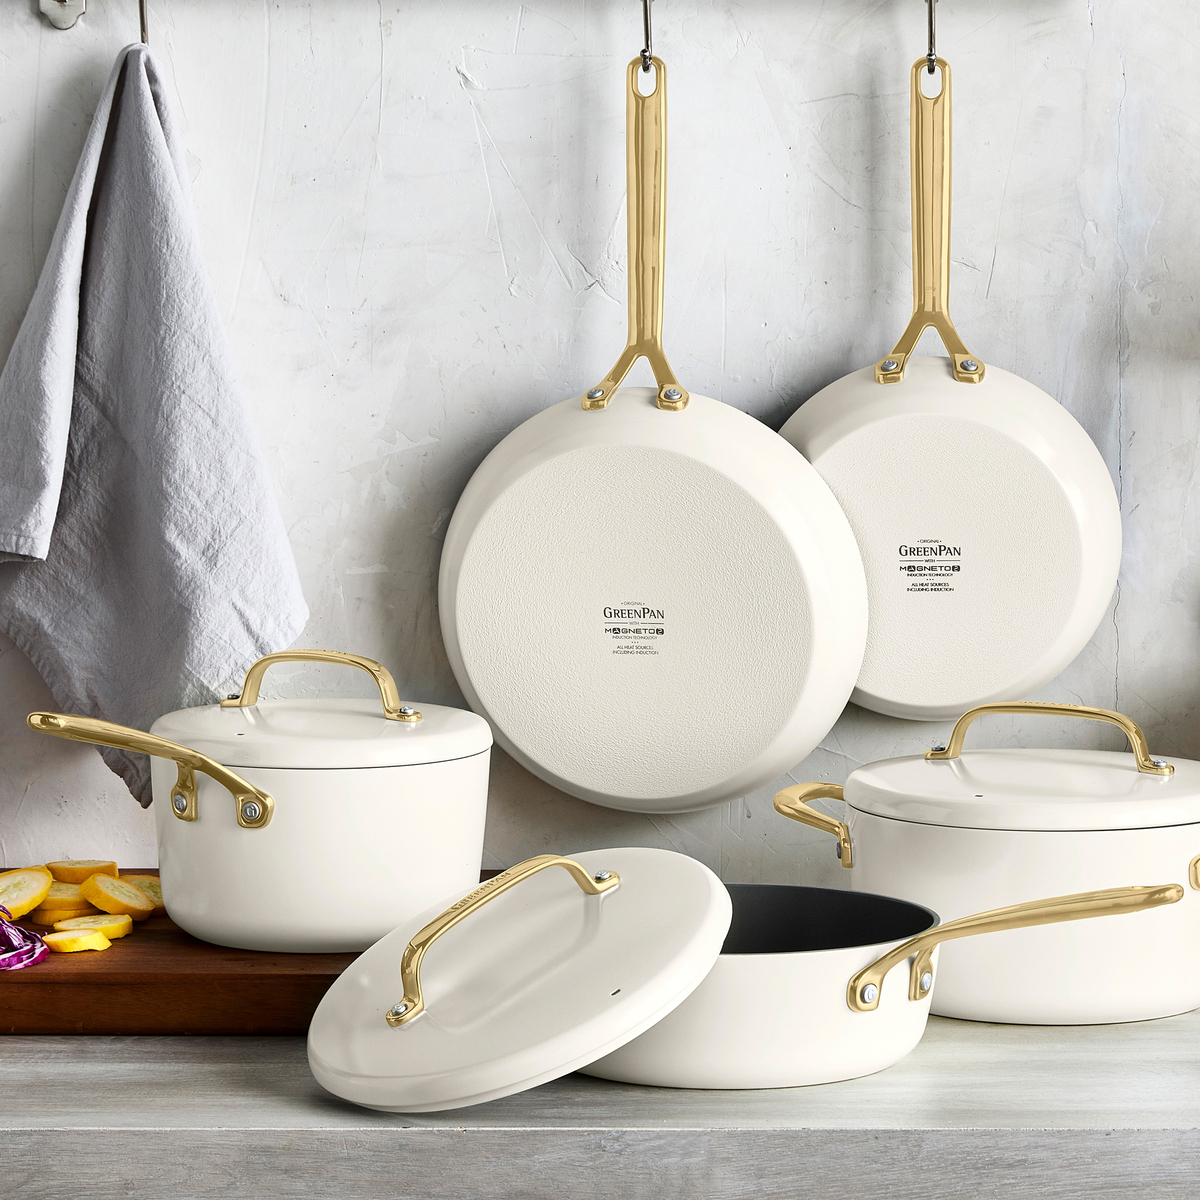 Cookware Sets: Up to 75% Off